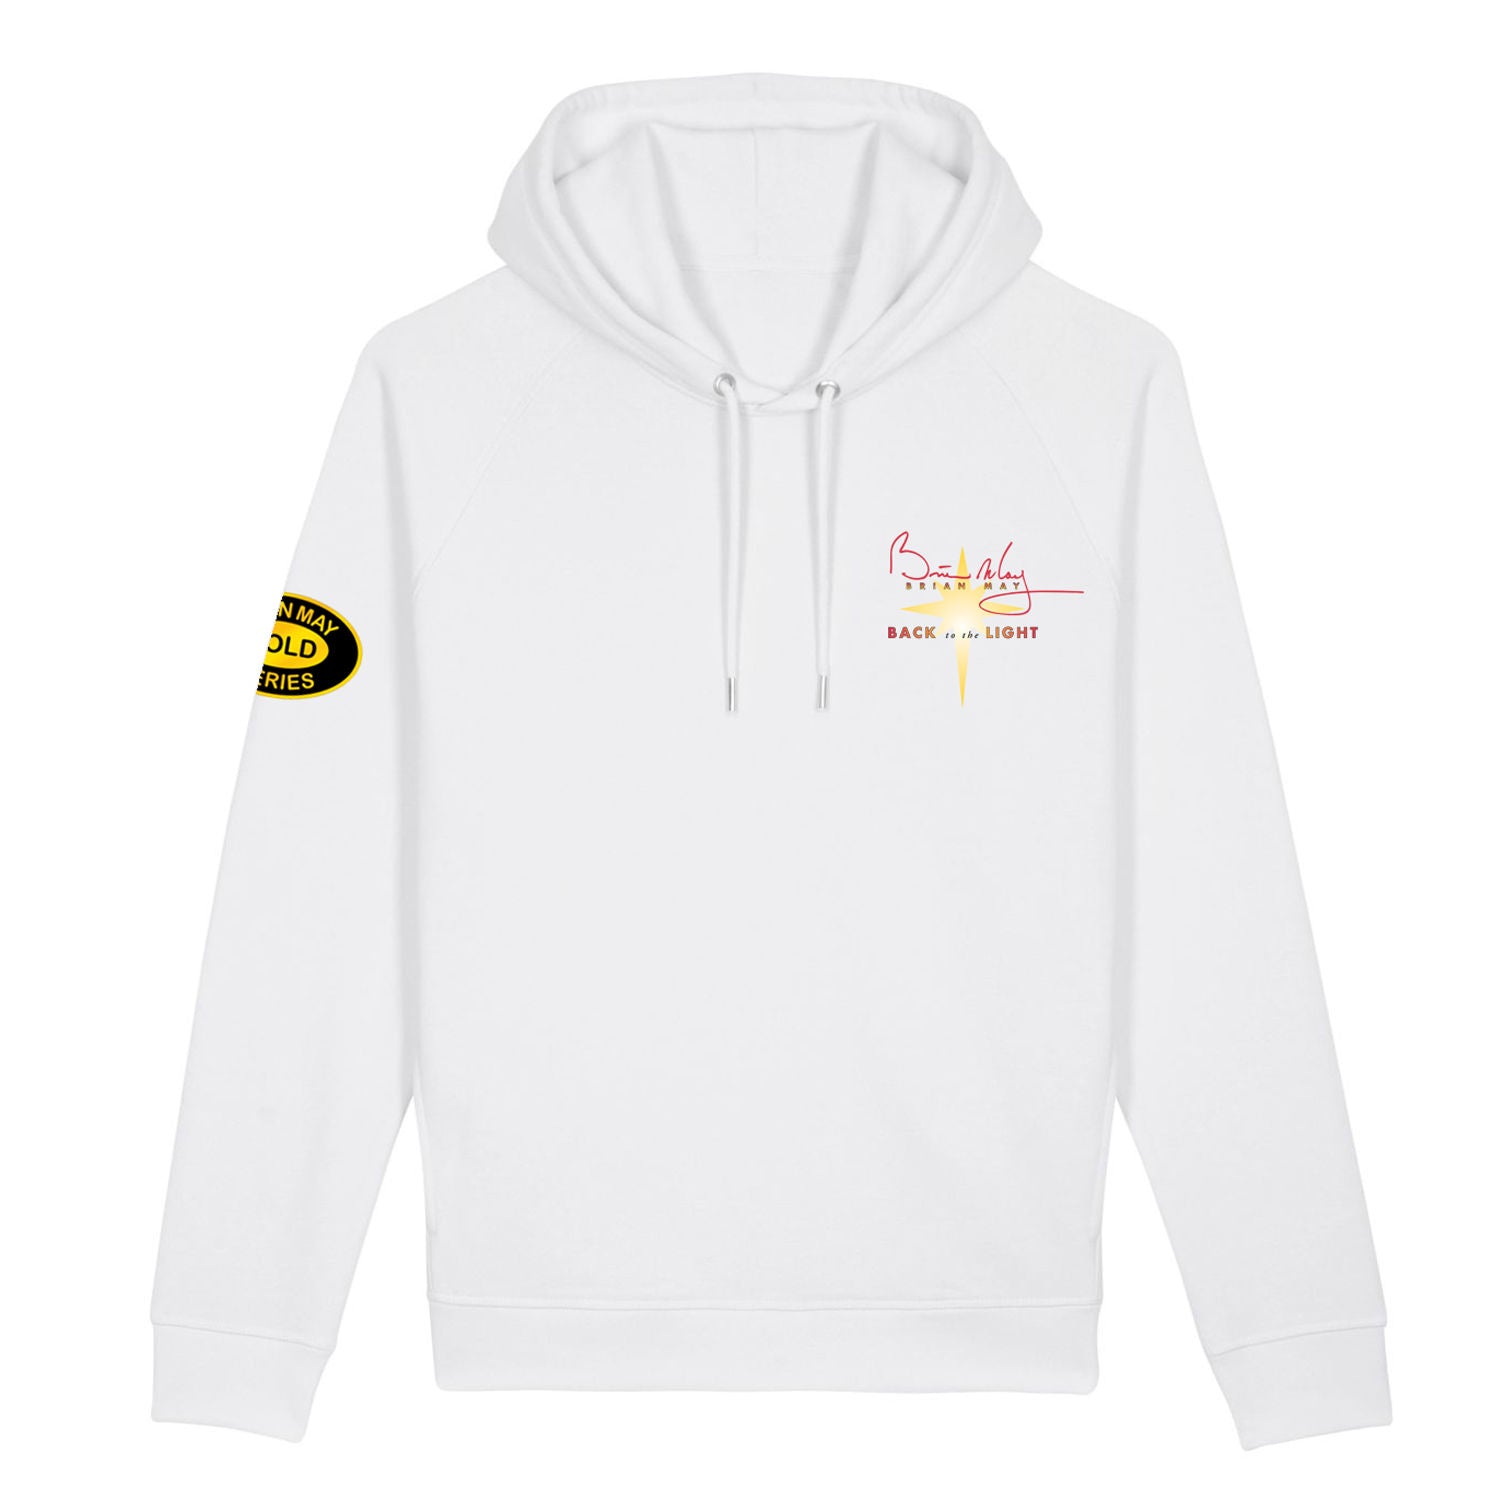 Brian May - Back To The Light Hoodie White